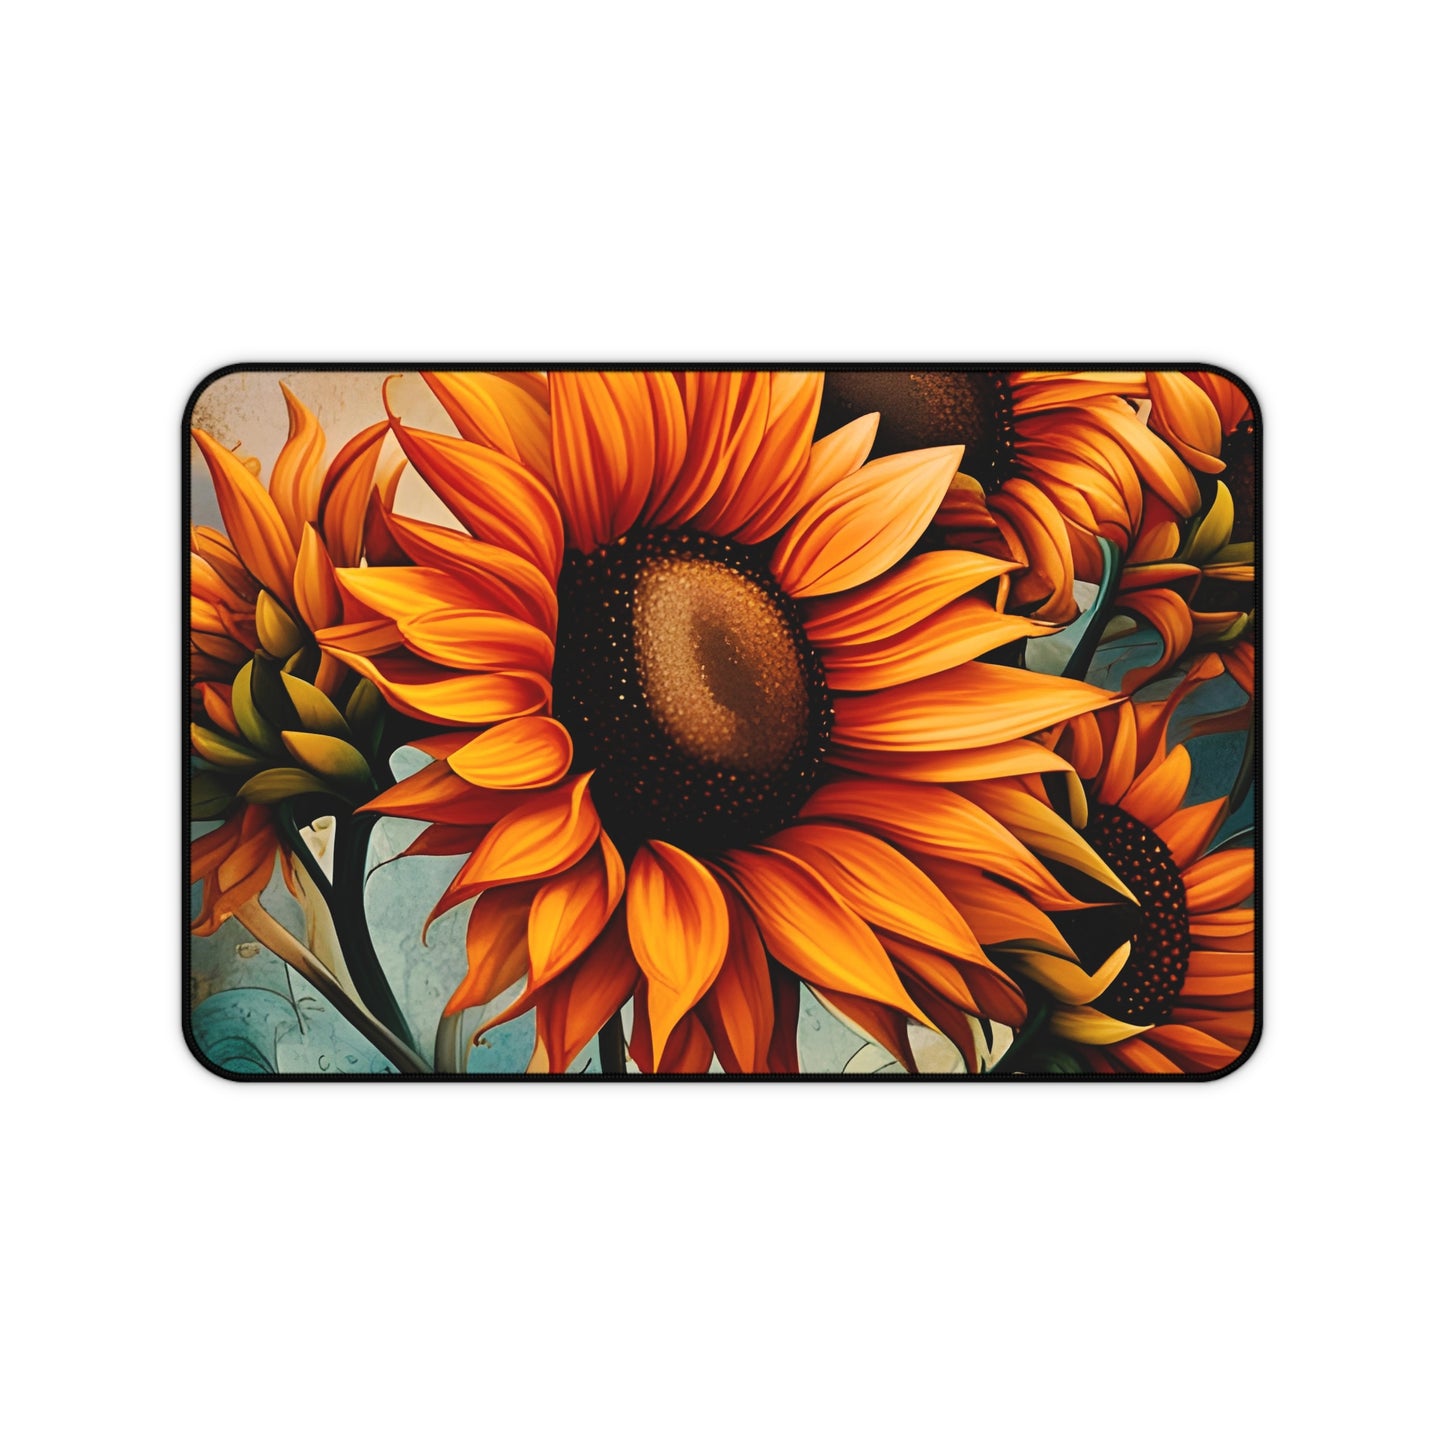 Sunflower Crop on Distressed Blue and Copper Background Printed on Desk mat 12x18